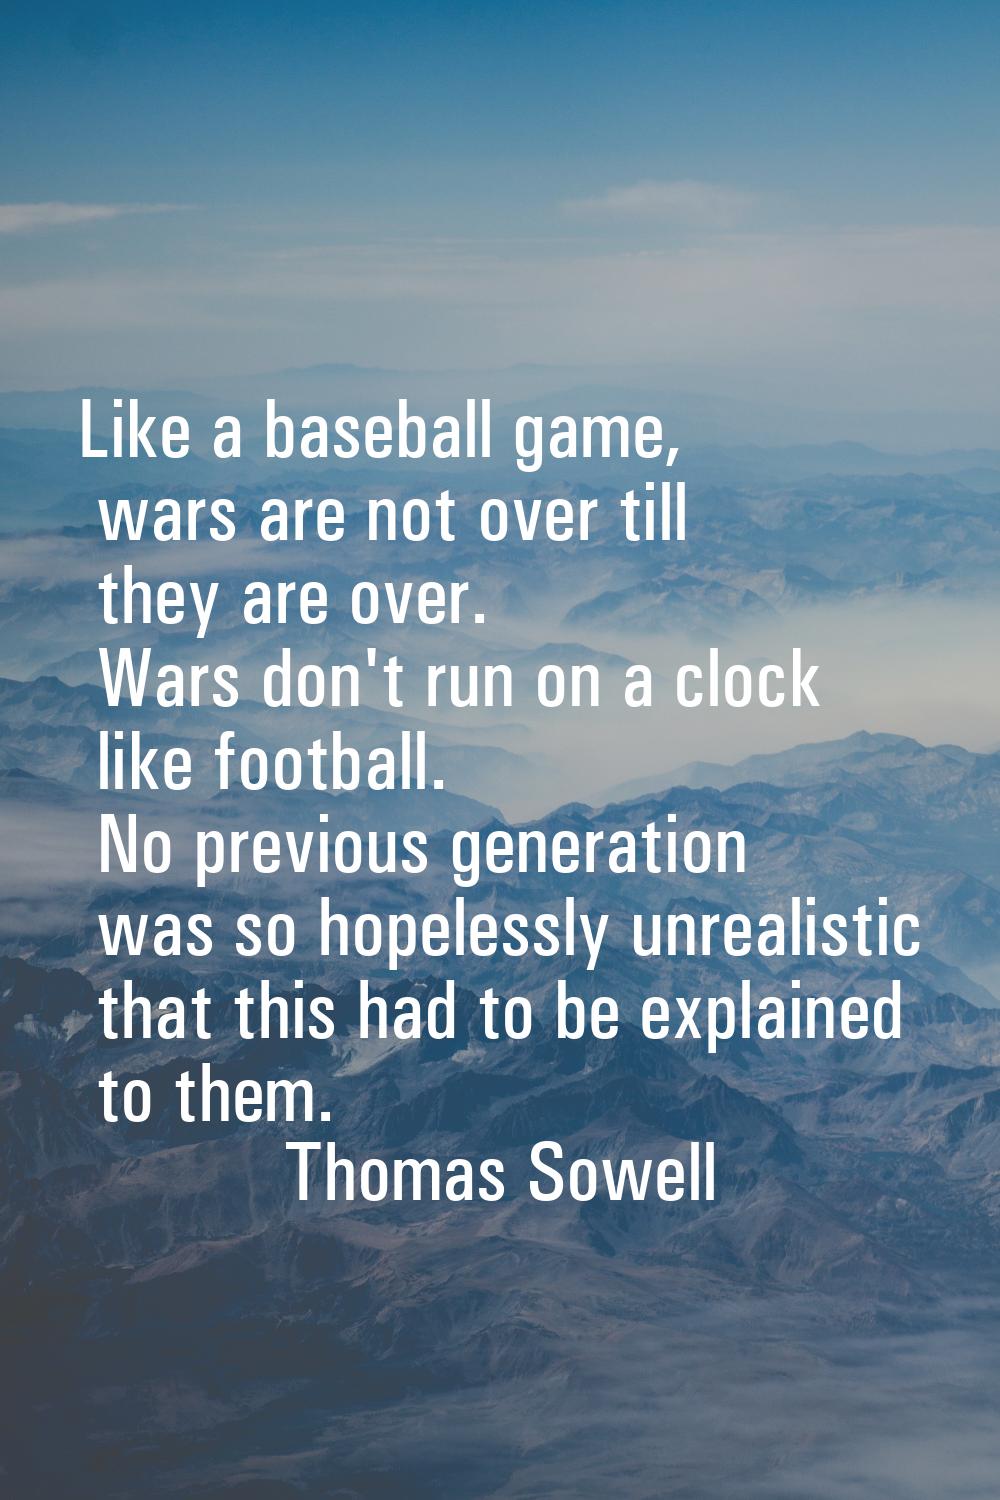 Like a baseball game, wars are not over till they are over. Wars don't run on a clock like football